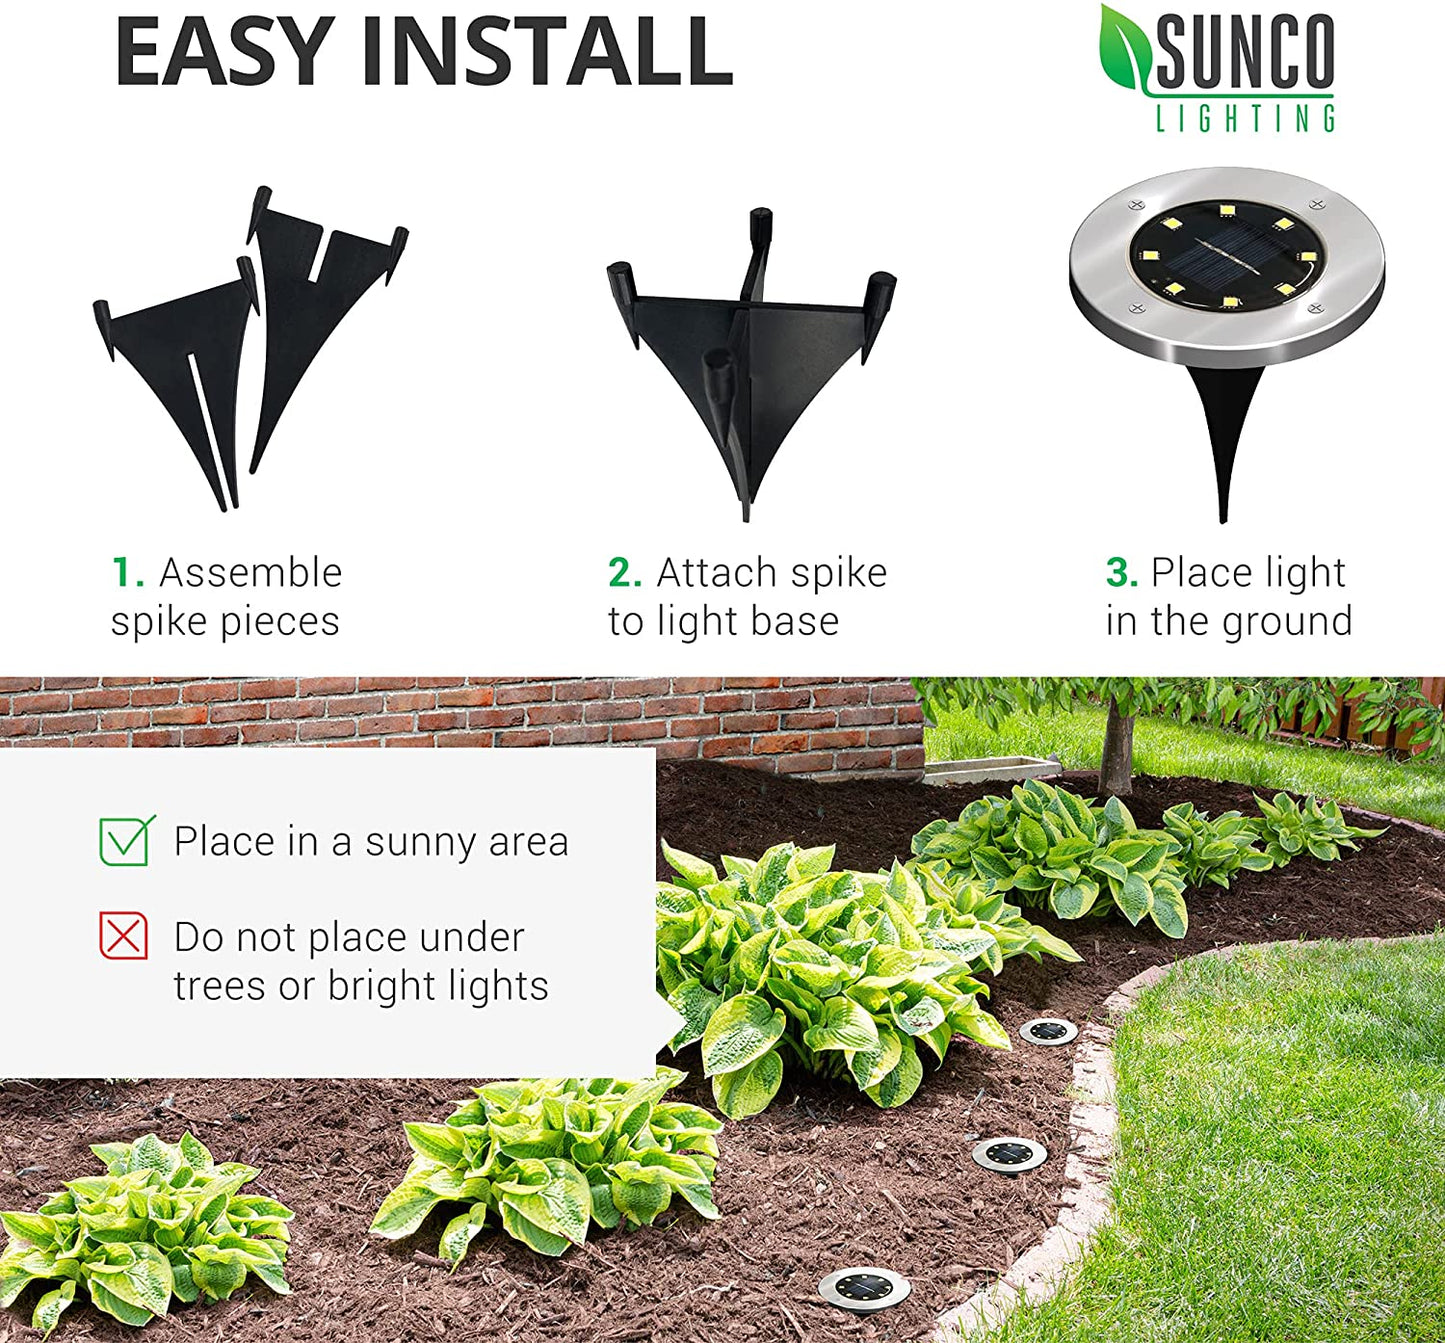 12 Count (Pack of 1) Solar Lights Outdoor Garden LED, Waterproof Landscape Pathway Light Fixture, Dusk to Dawn, Yard Patio Ground Lights, Deck, Cross Spike Stake, 7000K Diamond White